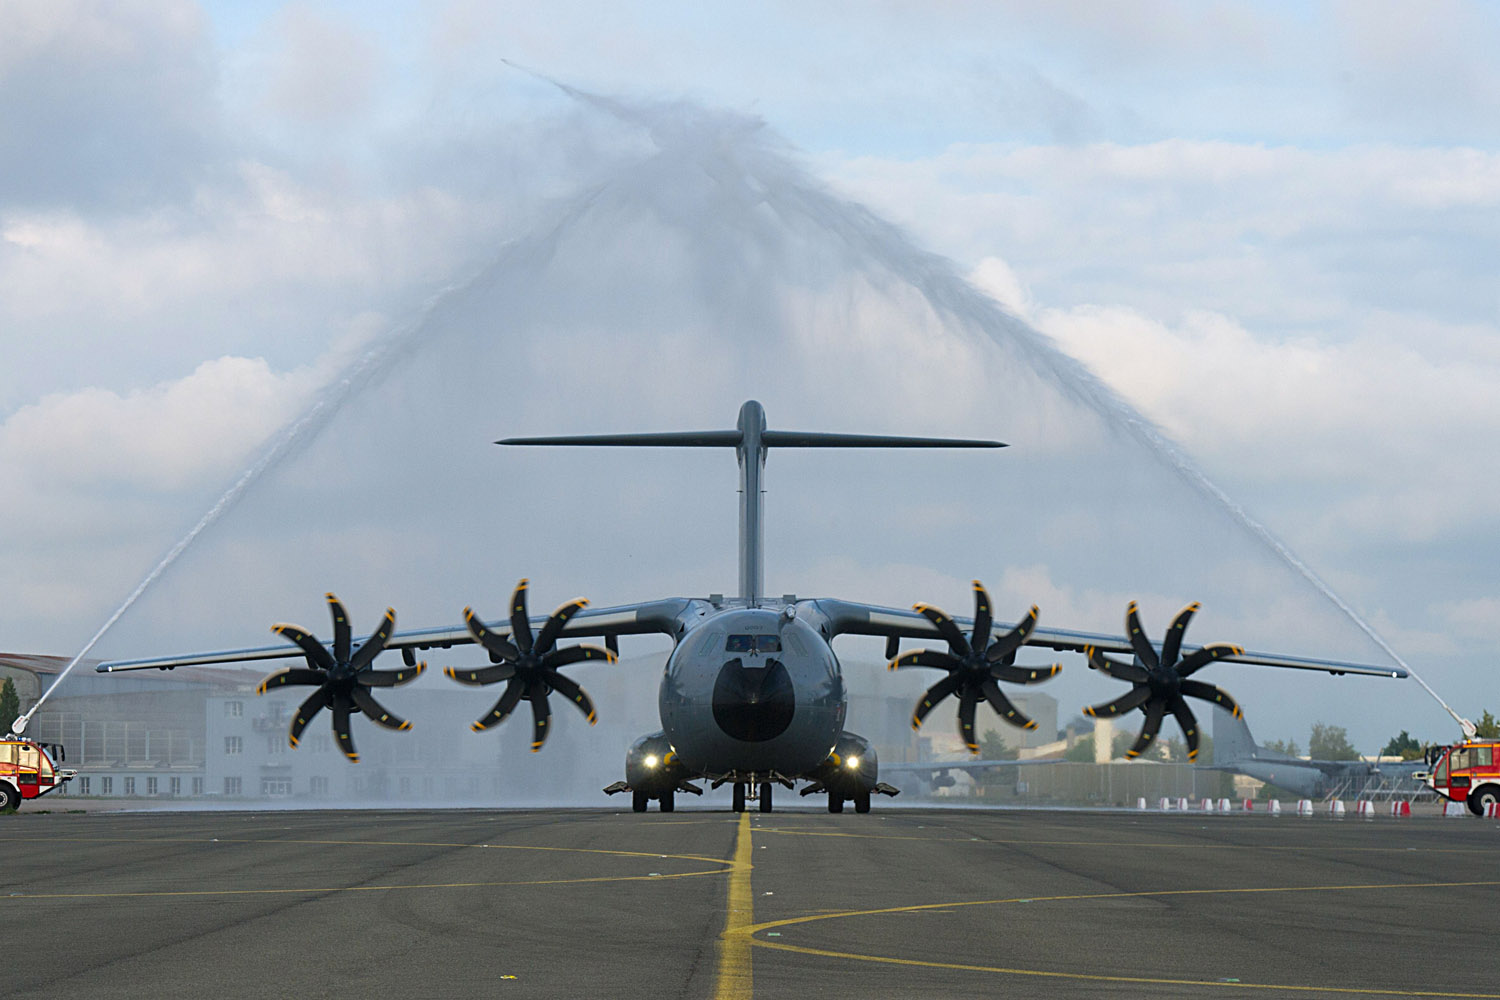 Sept. 30, 2013. The new French air force military transport Airbus A 400M is welcomed by fire engines at the military airbase BA 123 in Saint-Jean-de-la-Ruelle near Orleans, France as part of an official presentation.